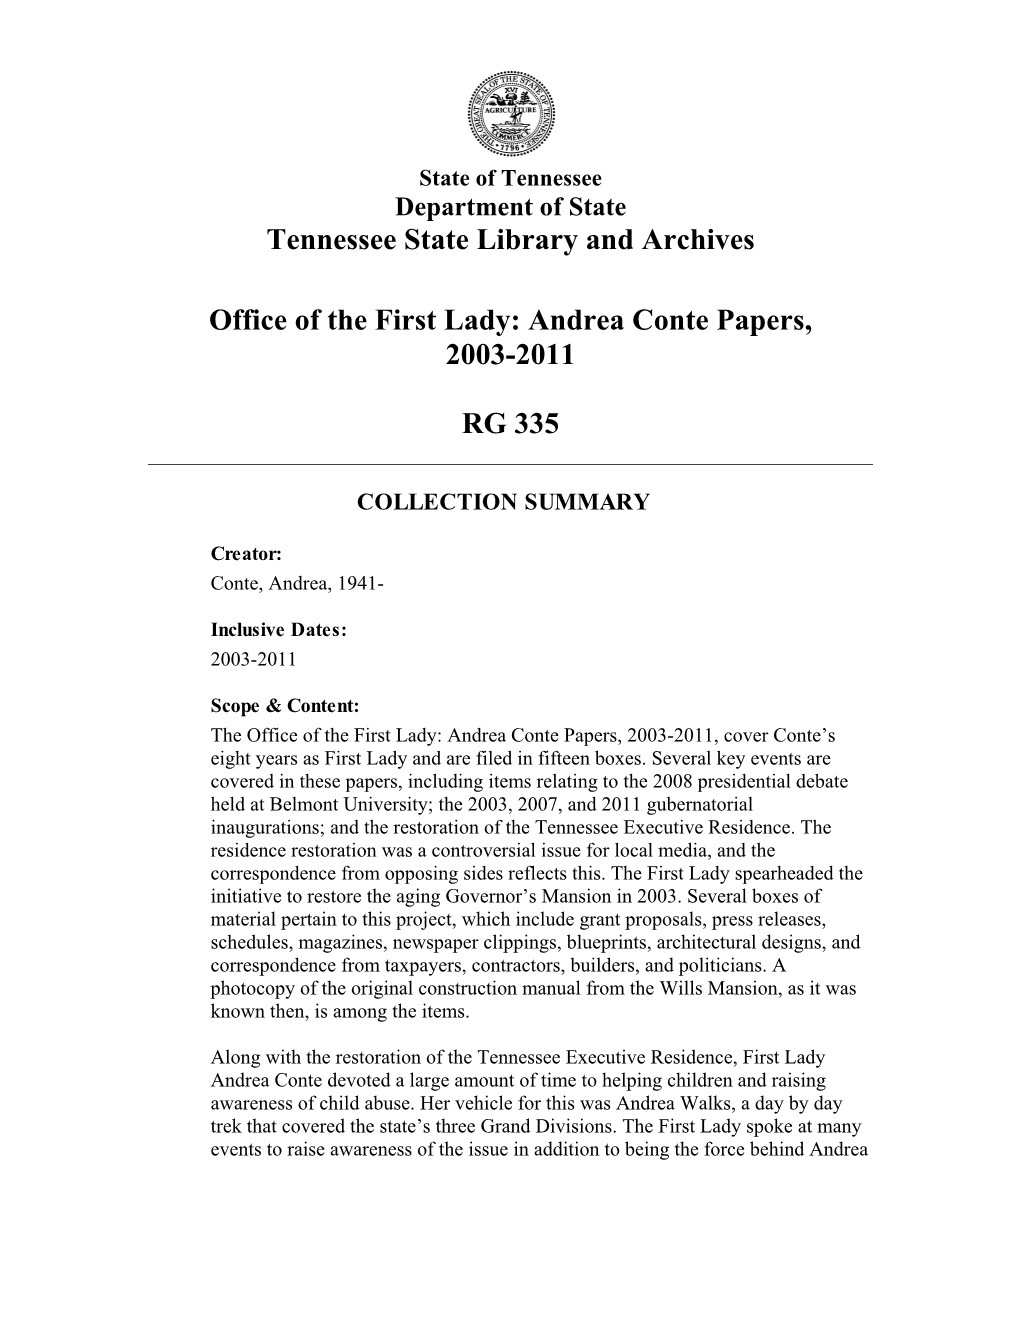 Tennessee State Library and Archives Office of the First Lady: Andrea Conte Papers, 2003-2011 RG